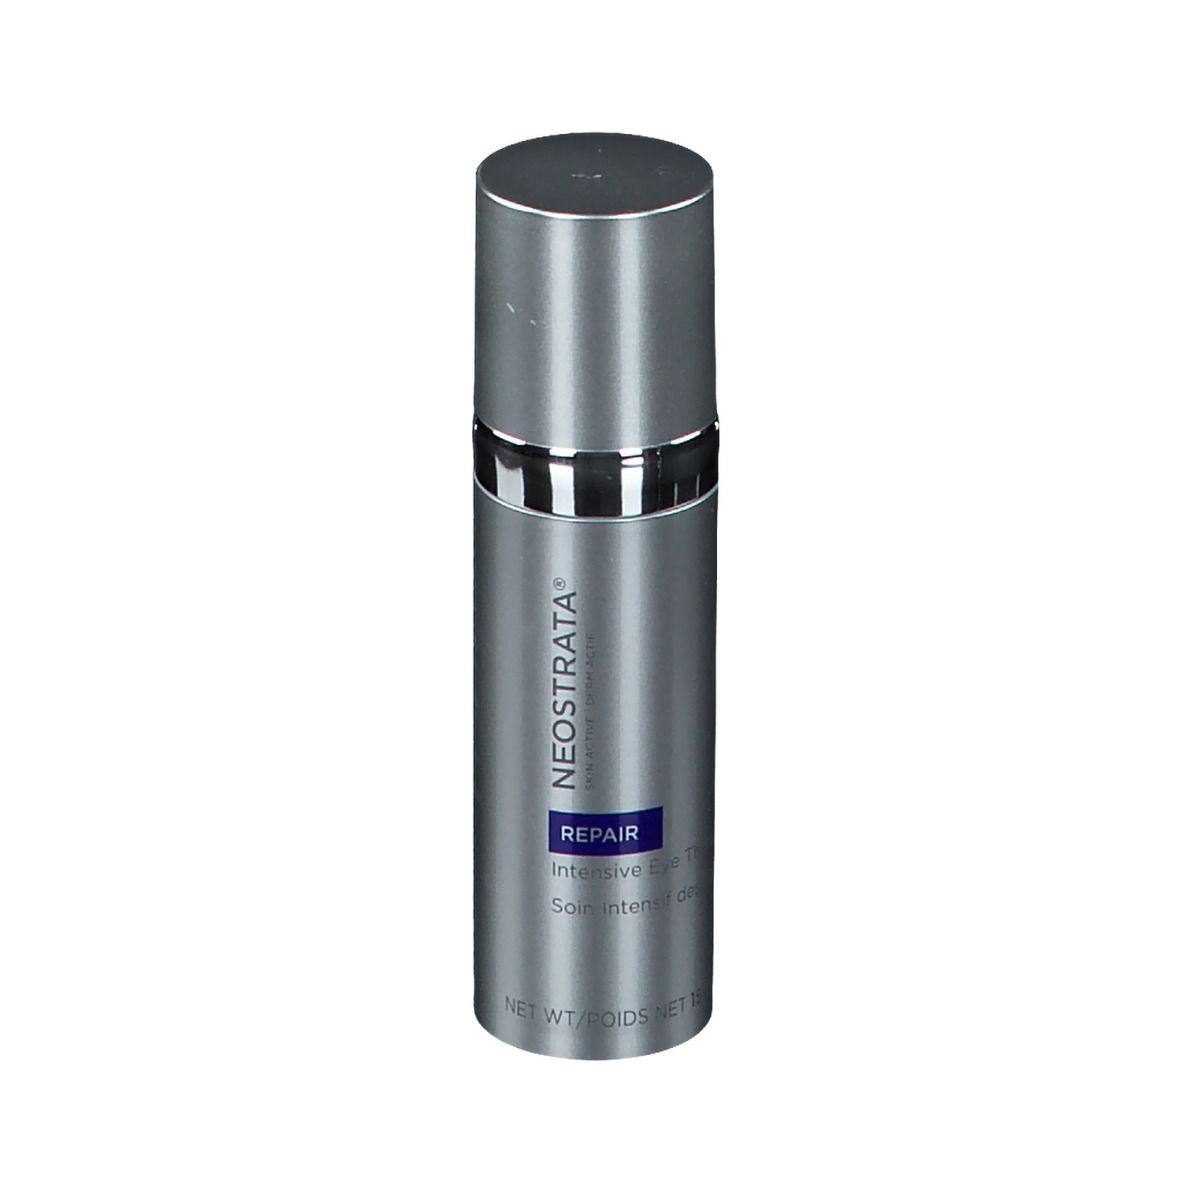 NeoStrata® Skin Active Intensive Eye Therapy